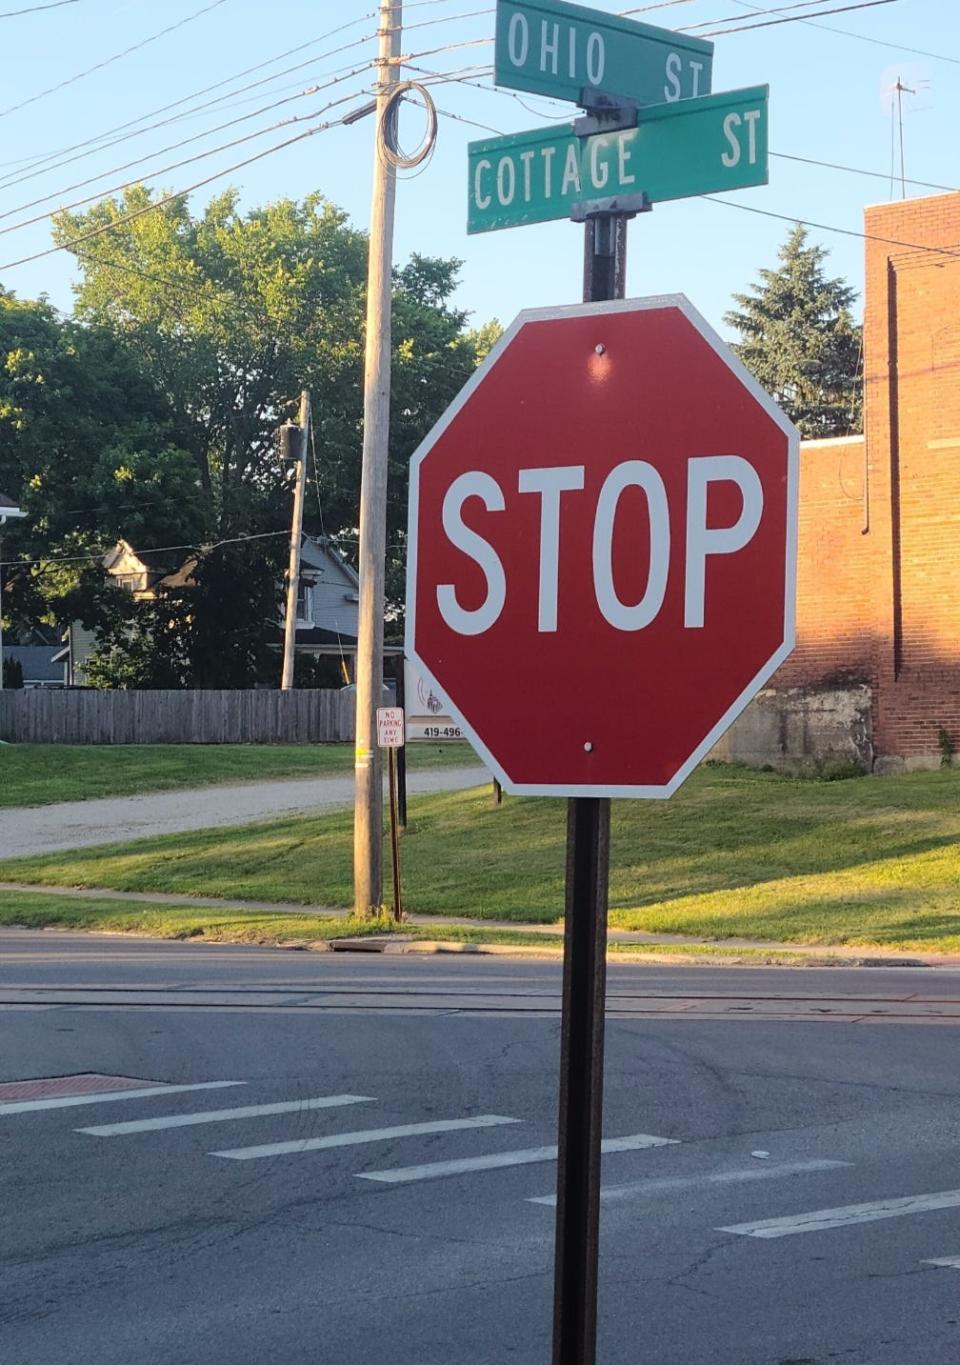 Ohio Street has had problems with speeders, according to a resident who spoke about the issue at Tuesday's Ashland City Council meeting. This stop sign at Cottage Street and one at the other end of the street at Masters Avenue are the only stop signs on the seven-block street.